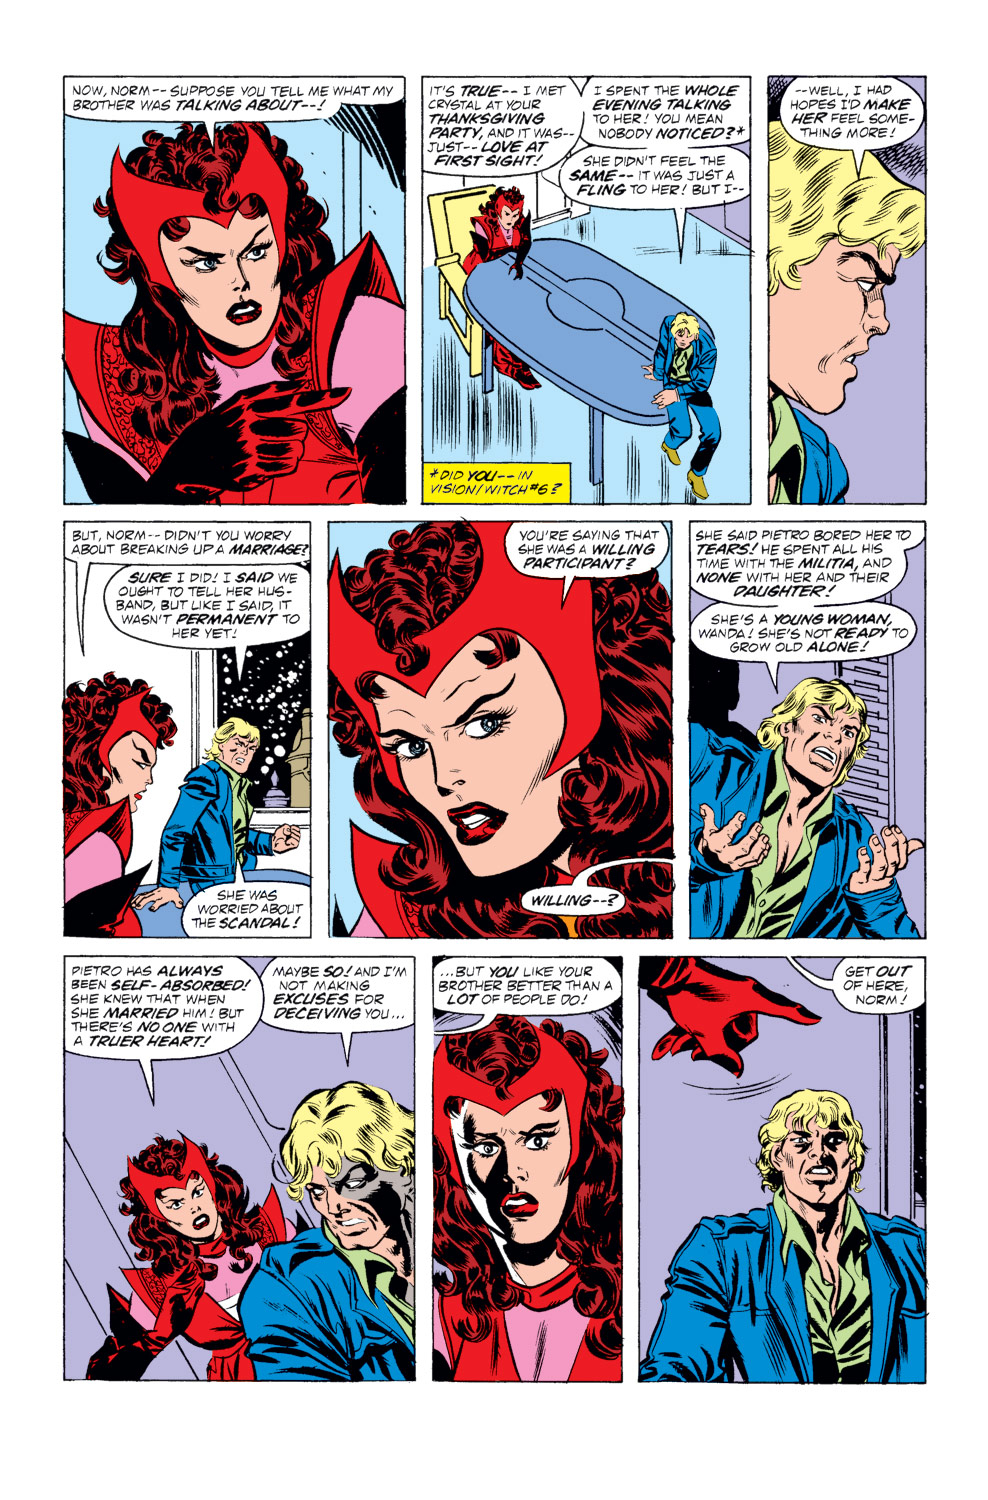 Vision And The Scarlet Witch V2 10, Read Vision And The Scarlet Witch V2  10 comic online in high quality. Website to search, classify, summarize,  and evaluate comics.